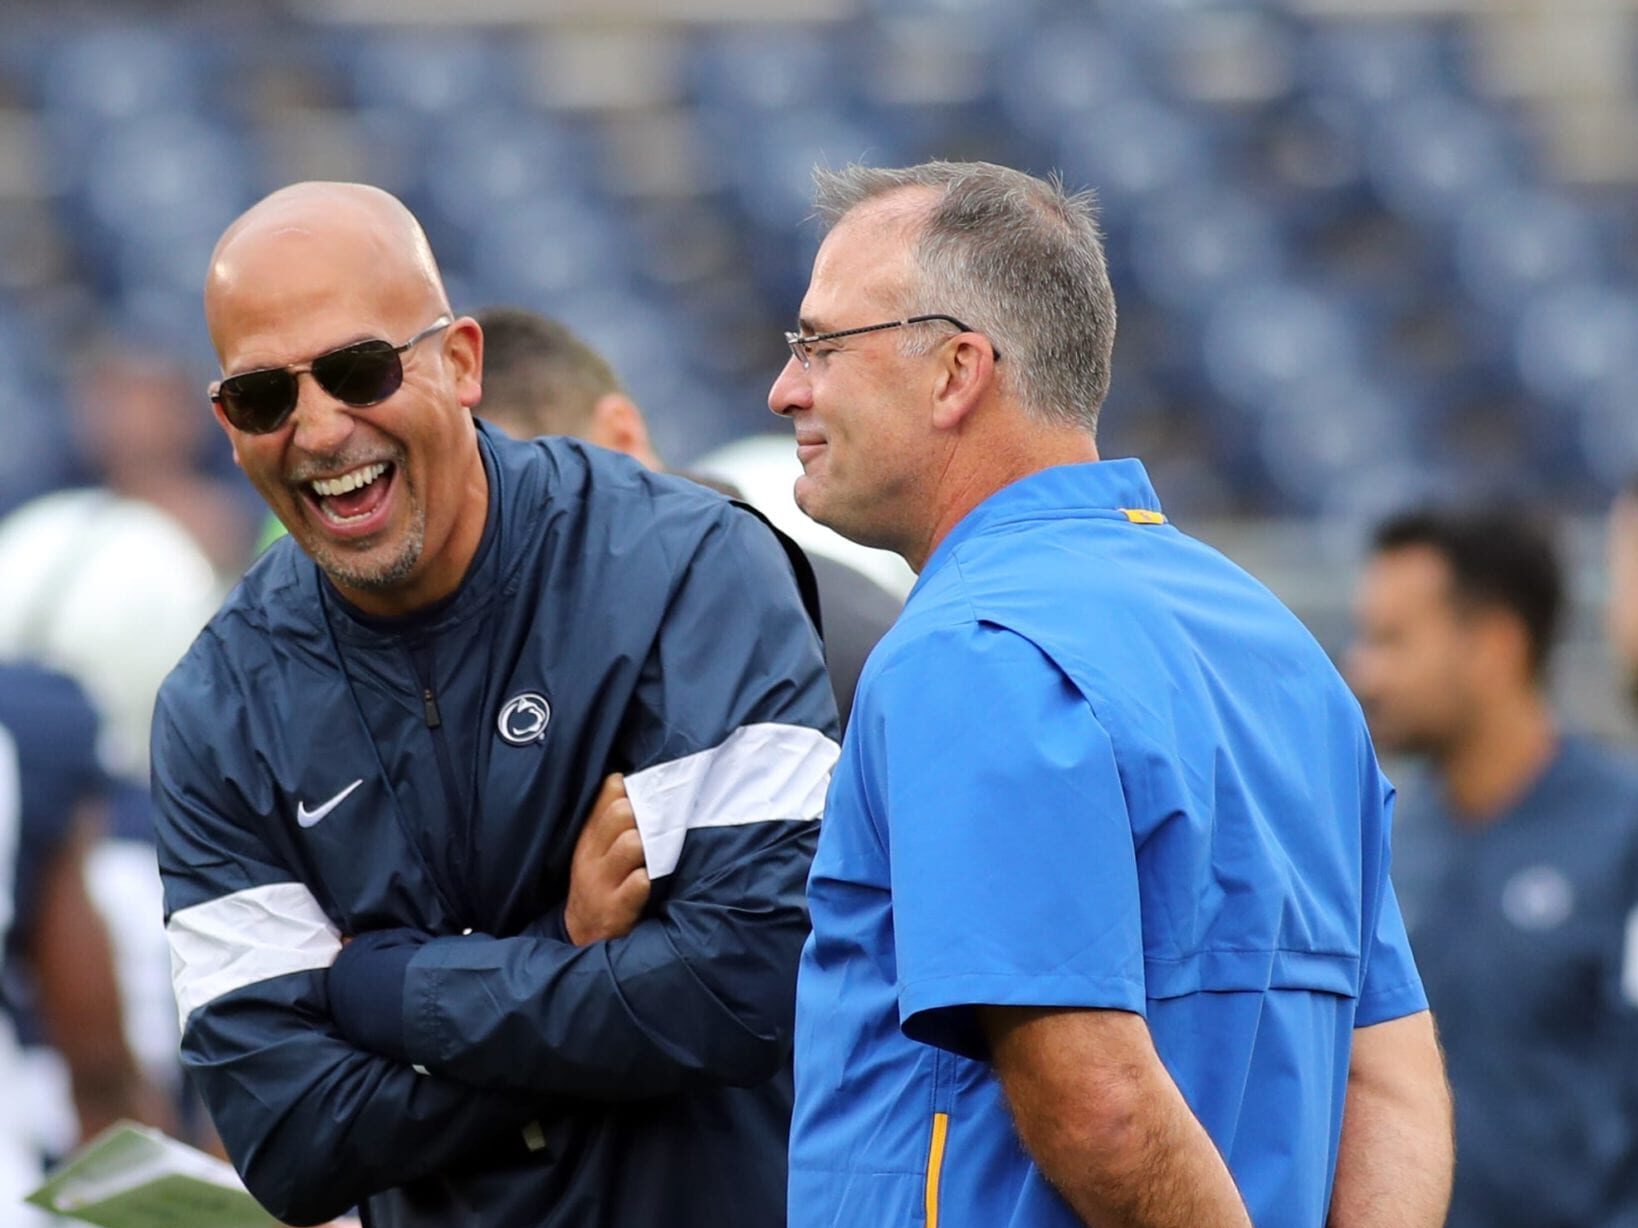 Pat Narduzzi and Penn State head coach James Franklin share a laugh before the game September 14, 2019 -- David Hague/PSN